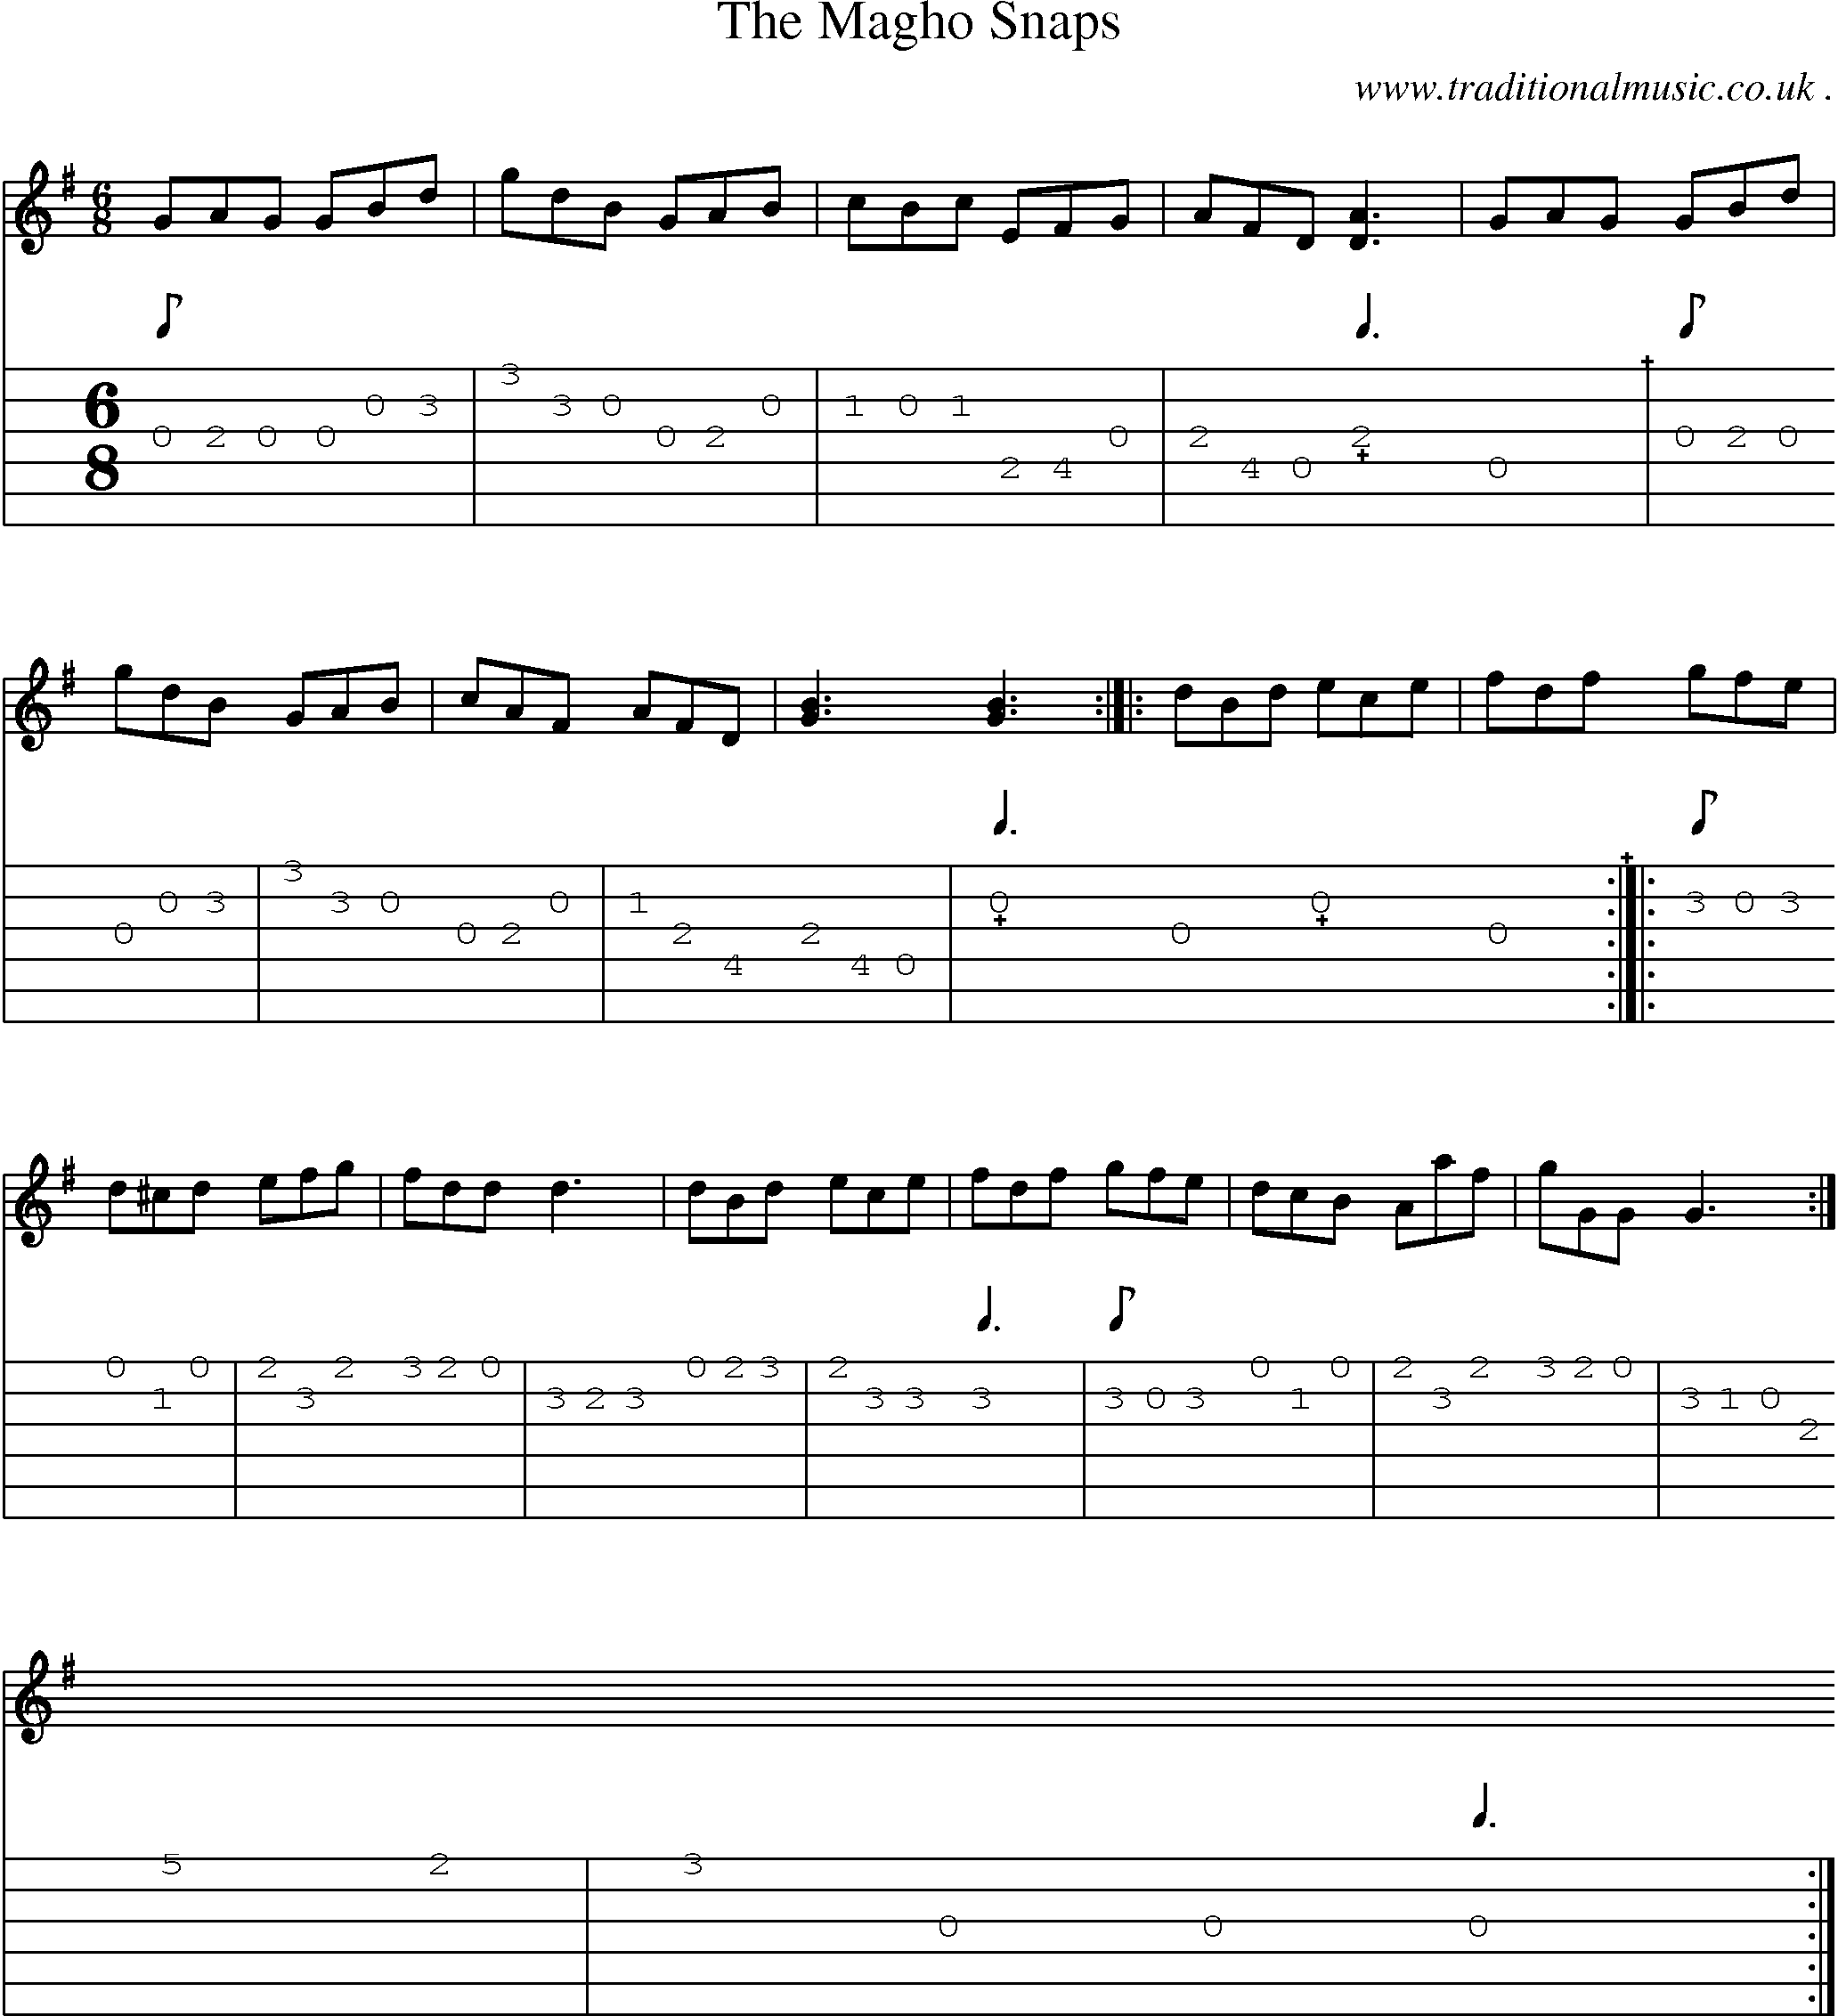 Sheet-Music and Guitar Tabs for The Magho Snaps